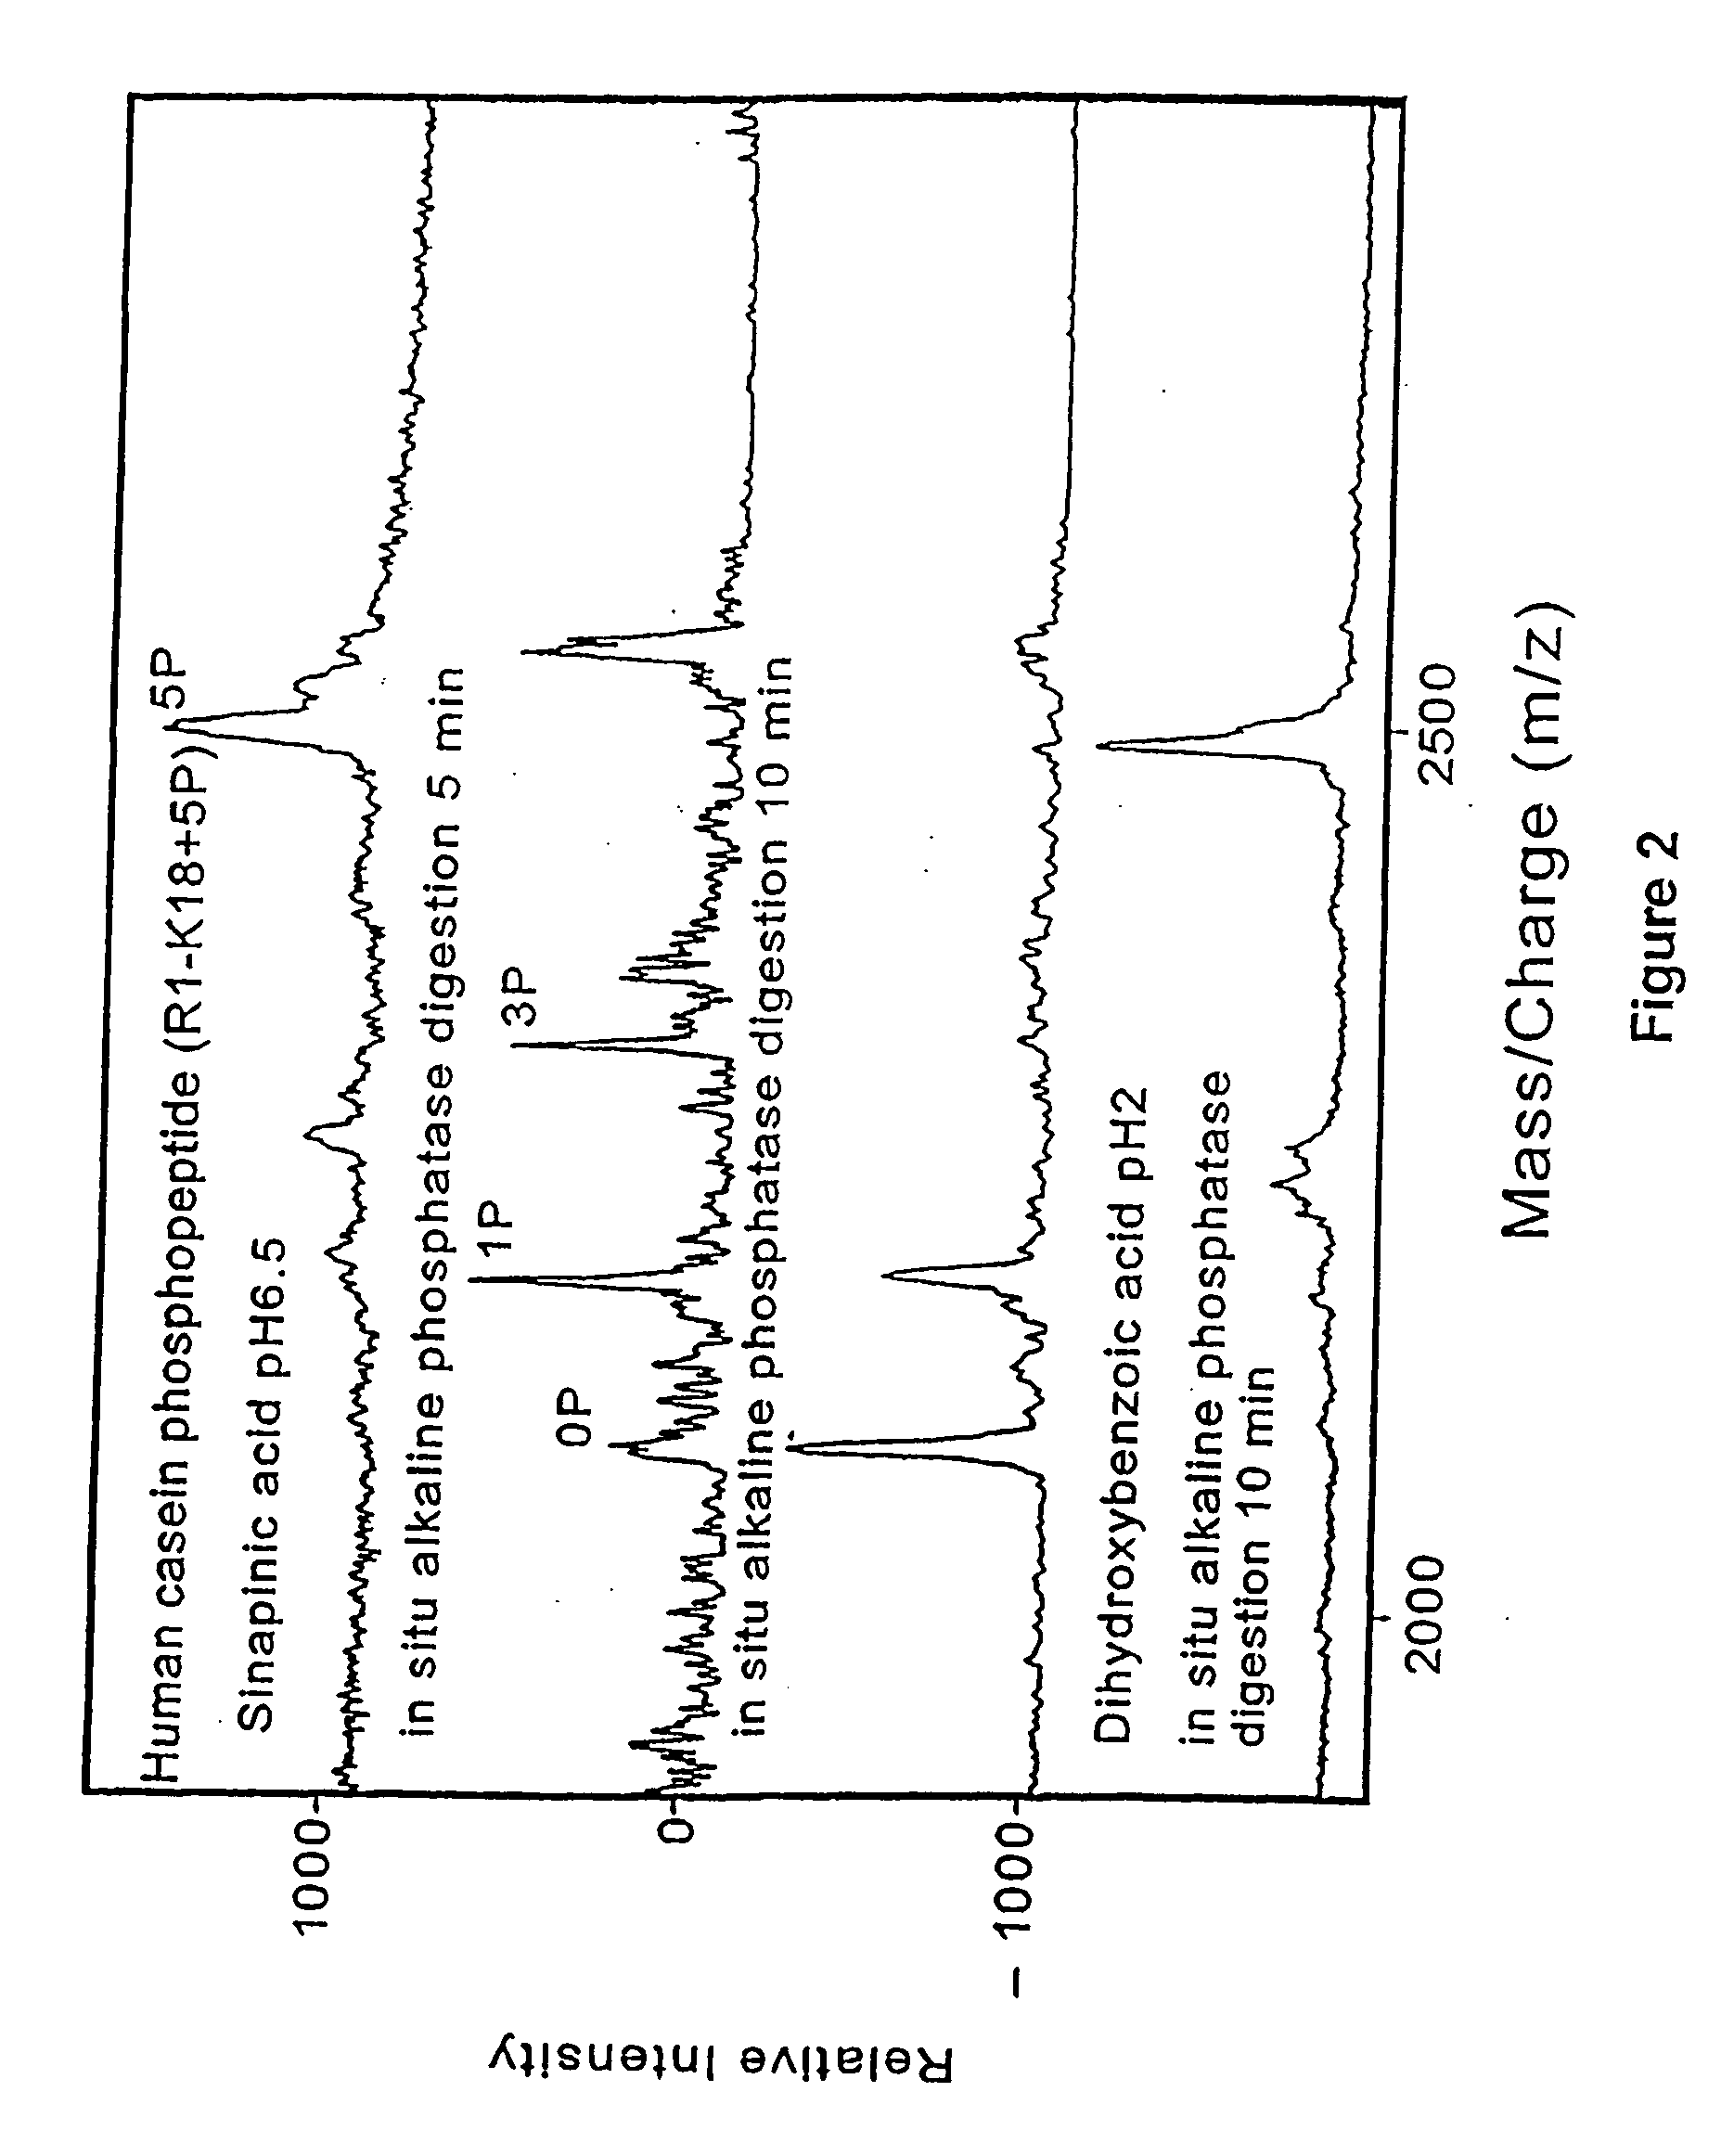 Method and apparatus for desorption and ionization of analytes